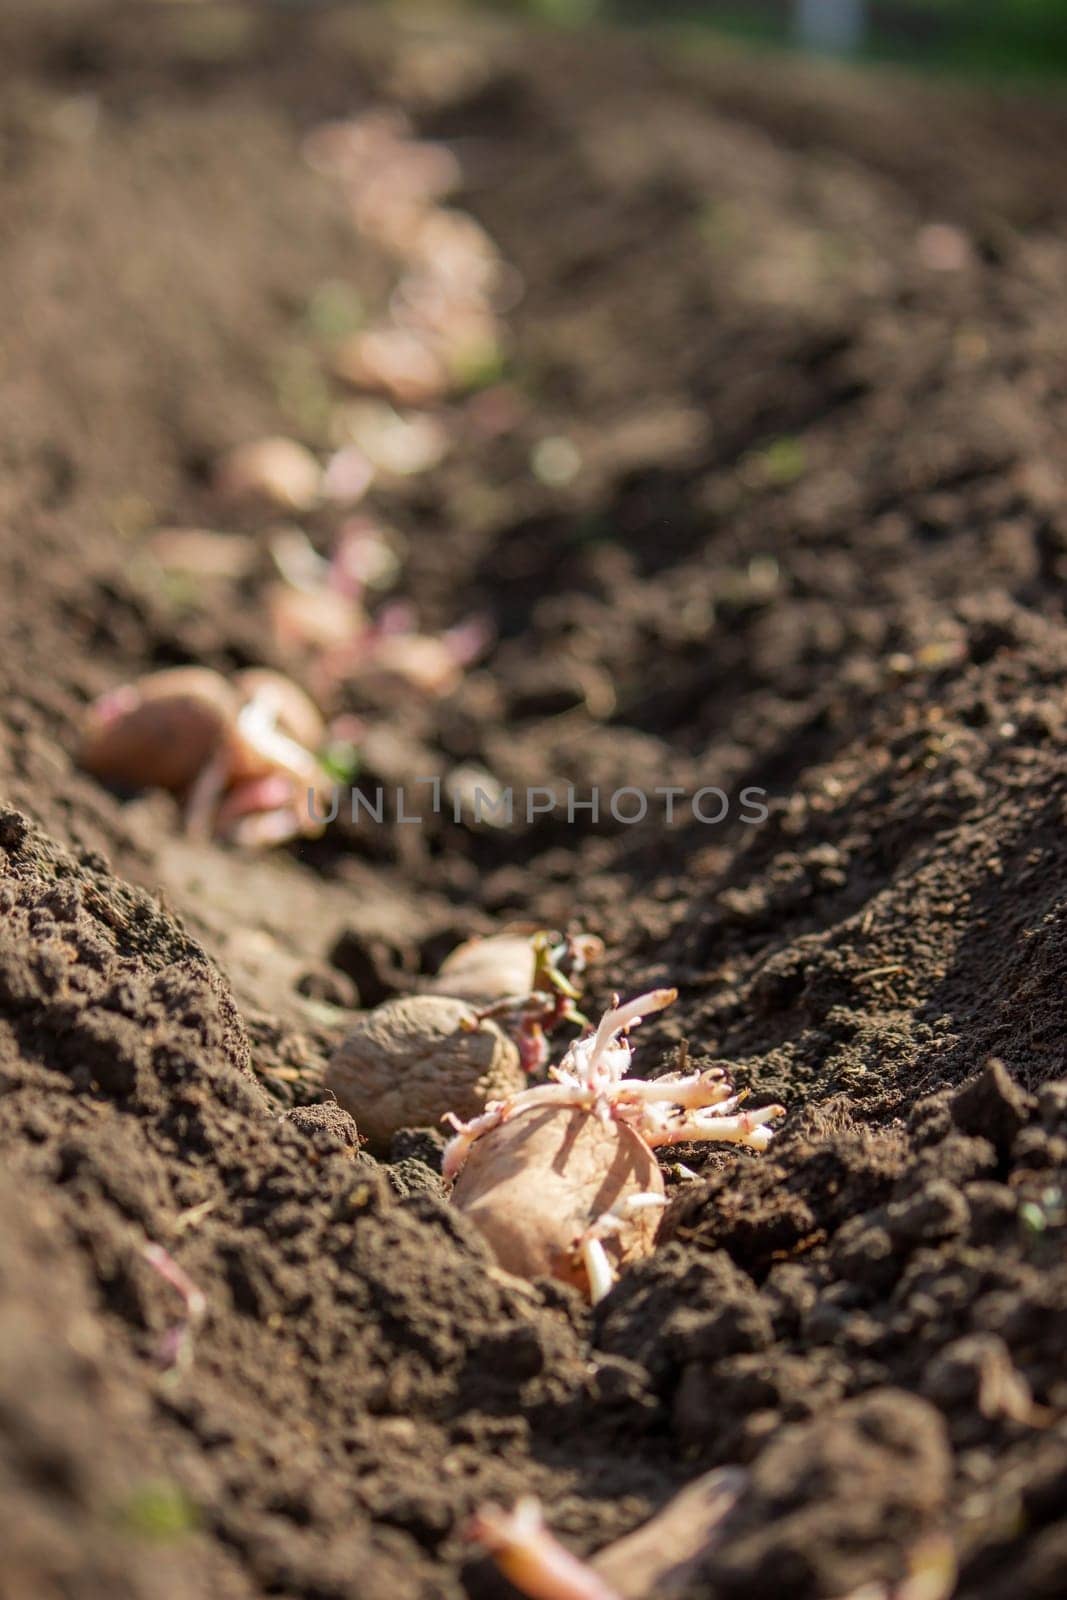 Hand planting potato tubers into the ground. Early spring preparations for the garden season.